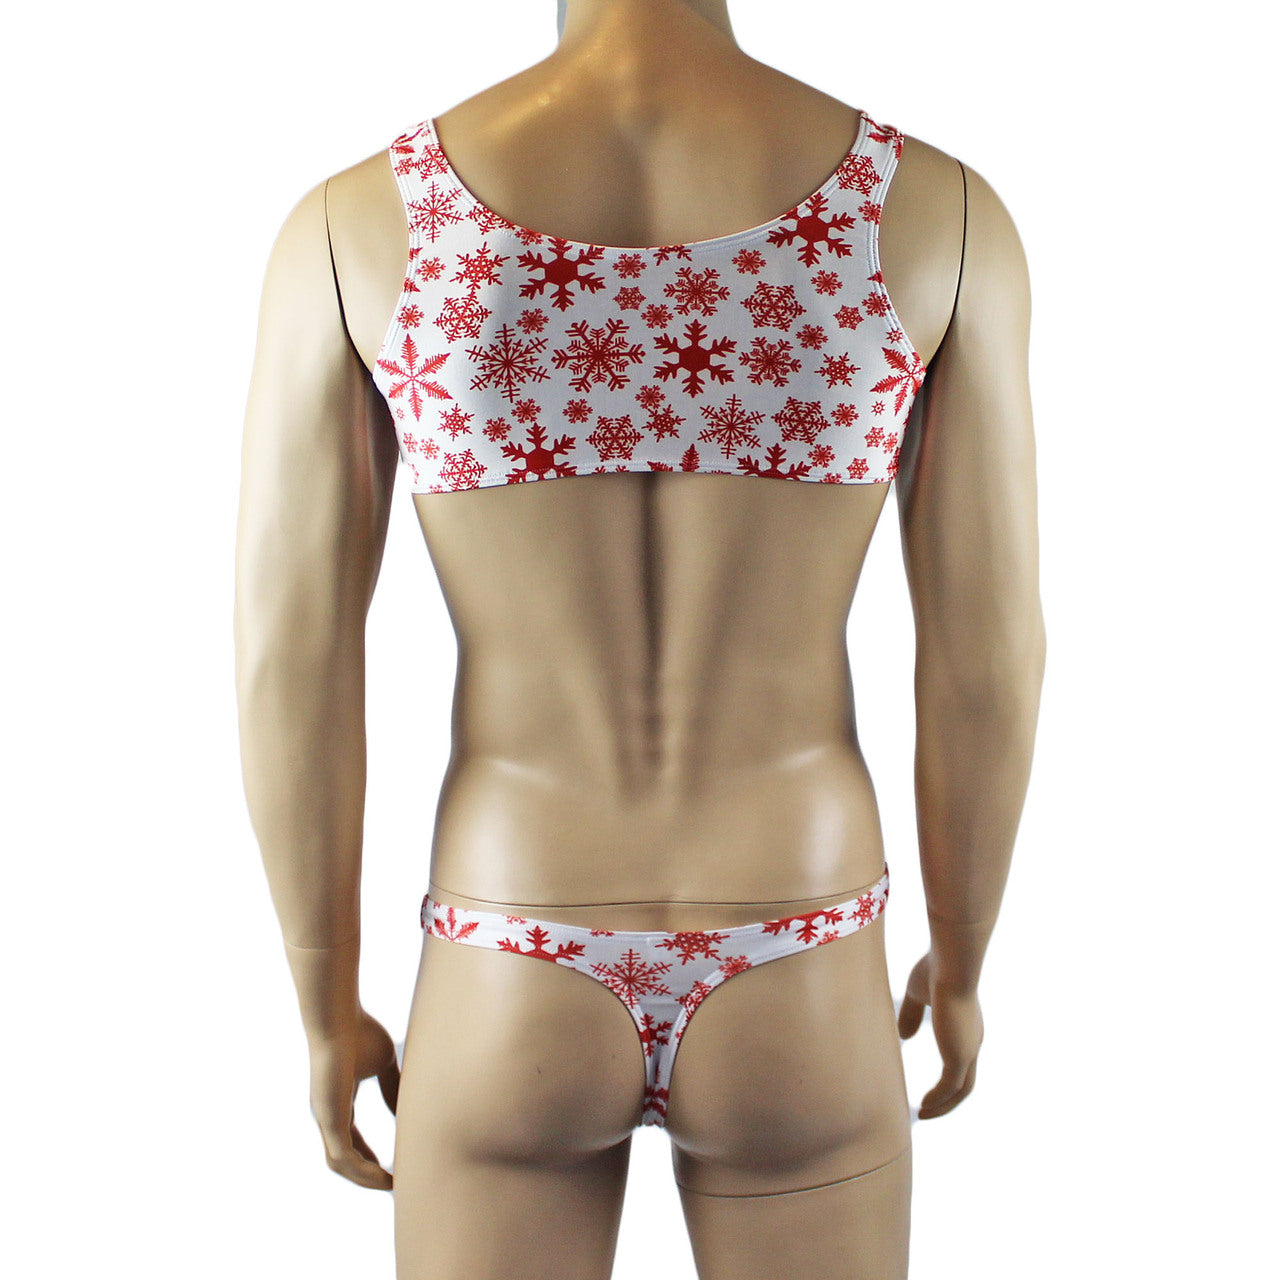 Mens Lingerie Snowflake Bra Top & Low Cut Thong White and Red